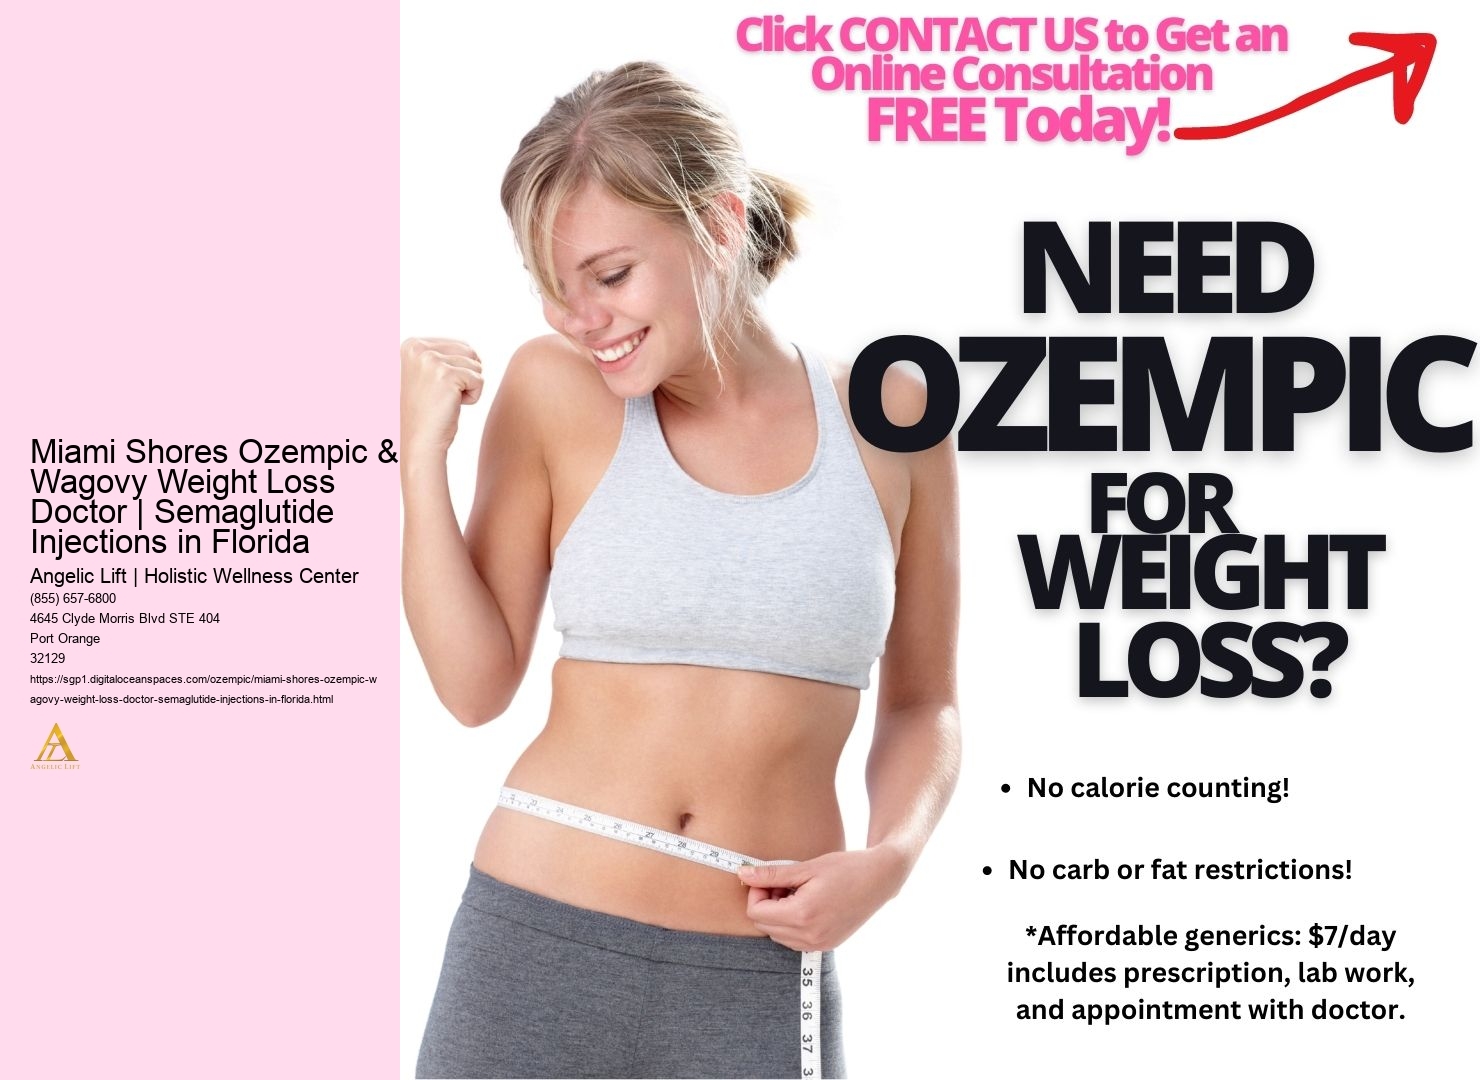 Miami Shores Ozempic & Wagovy Weight Loss Doctor | Semaglutide Injections in Florida